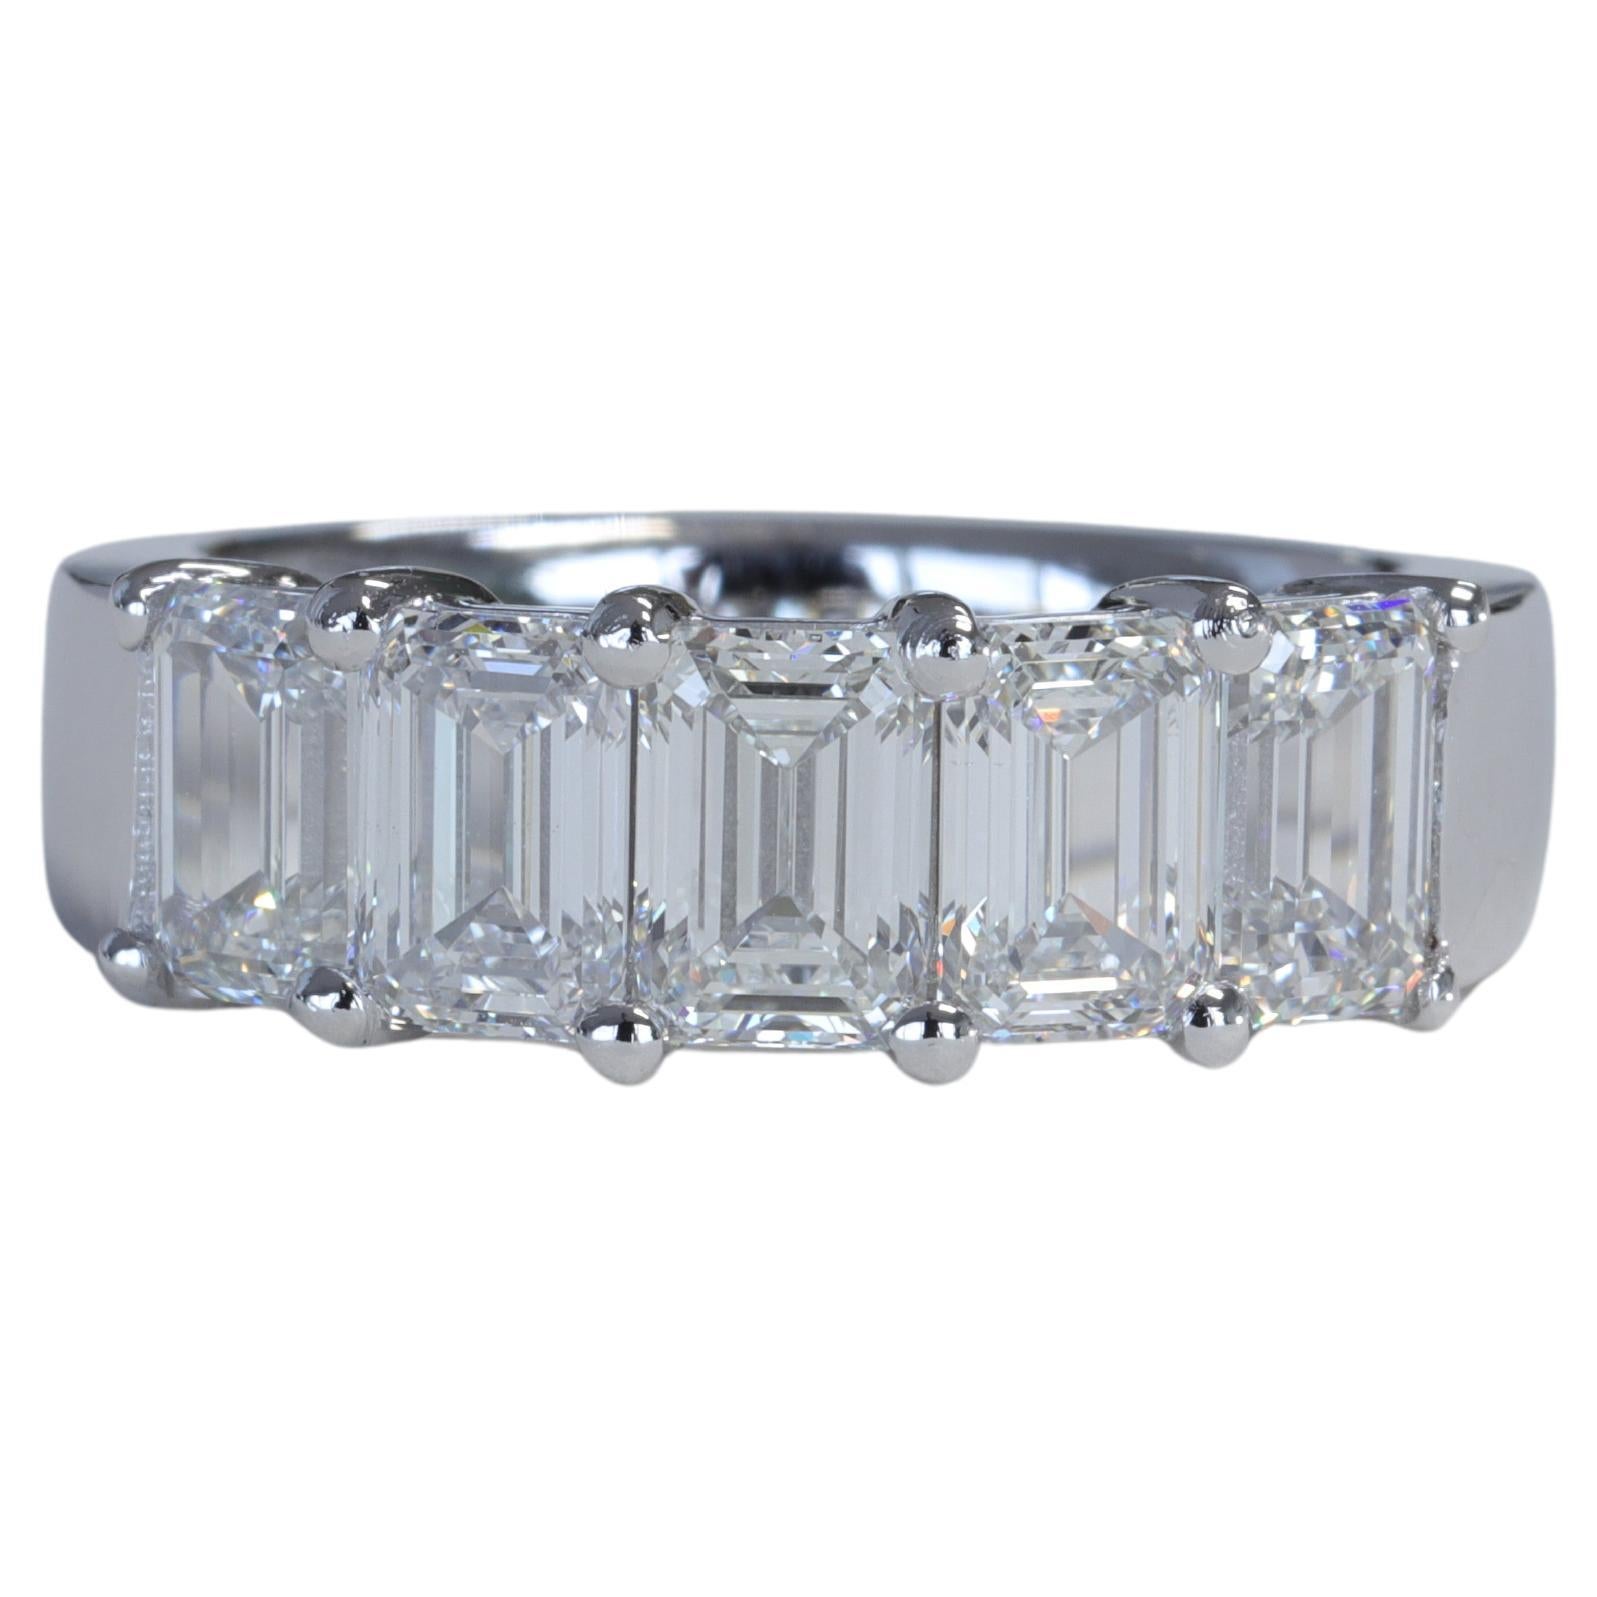 Emerald Cut Diamond and Platinum 5 Stone Anniversary Wedding Band Ring GIA For Sale